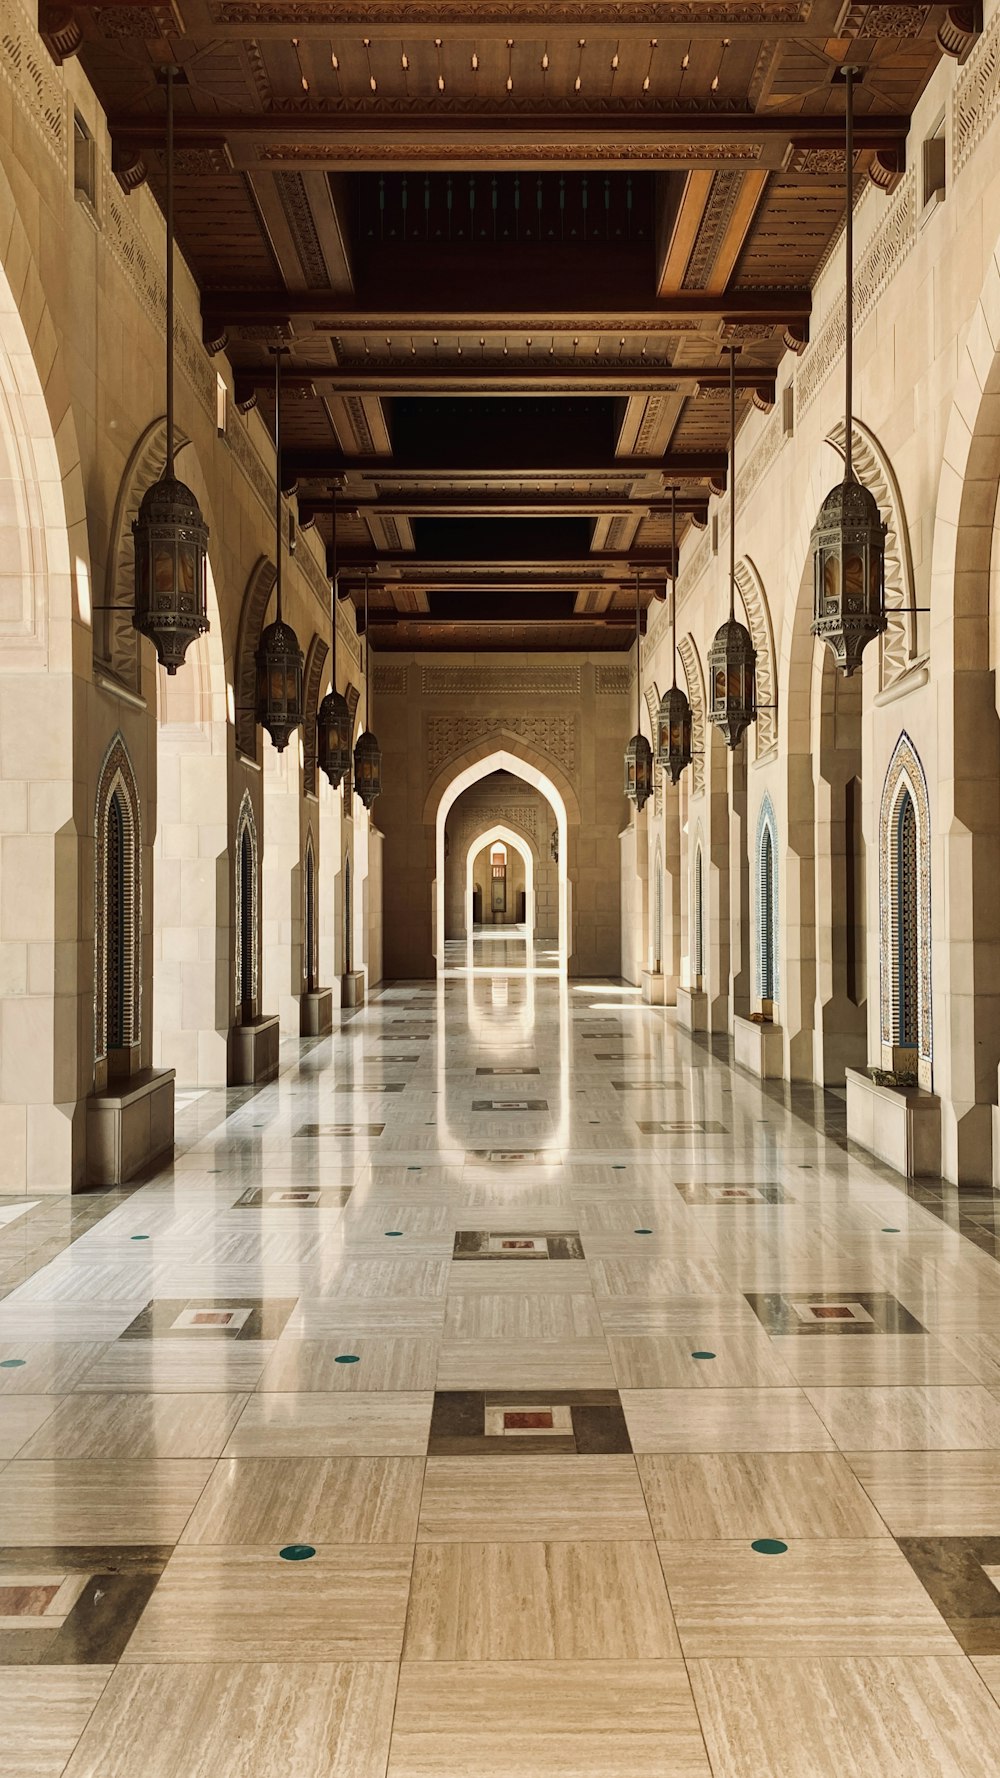 a long hallway with a tiled floor and arches